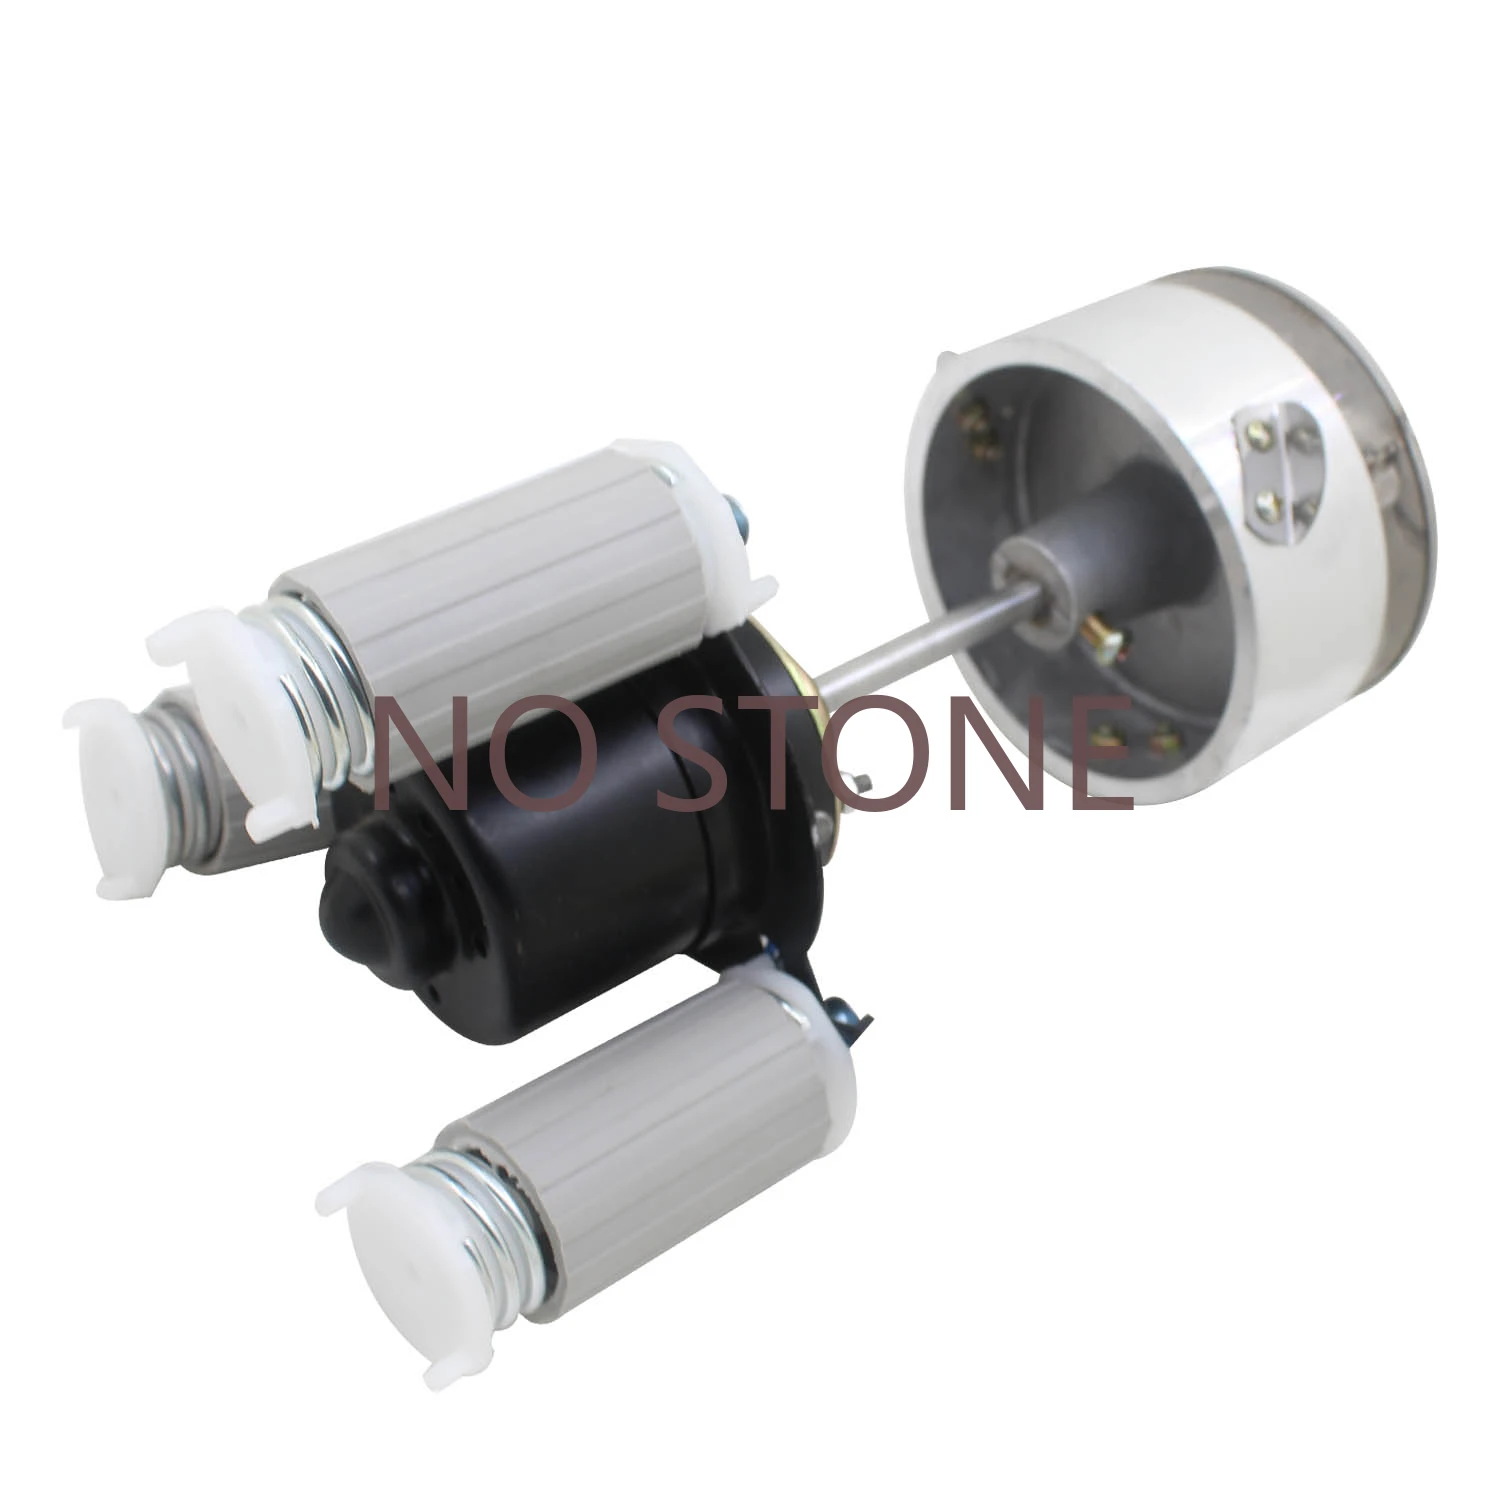 

12V A set of Sugar Boilers Head With Sugar Floss Melting Fittings Parts Motor Fancy Cotton Candy Machine Accessories